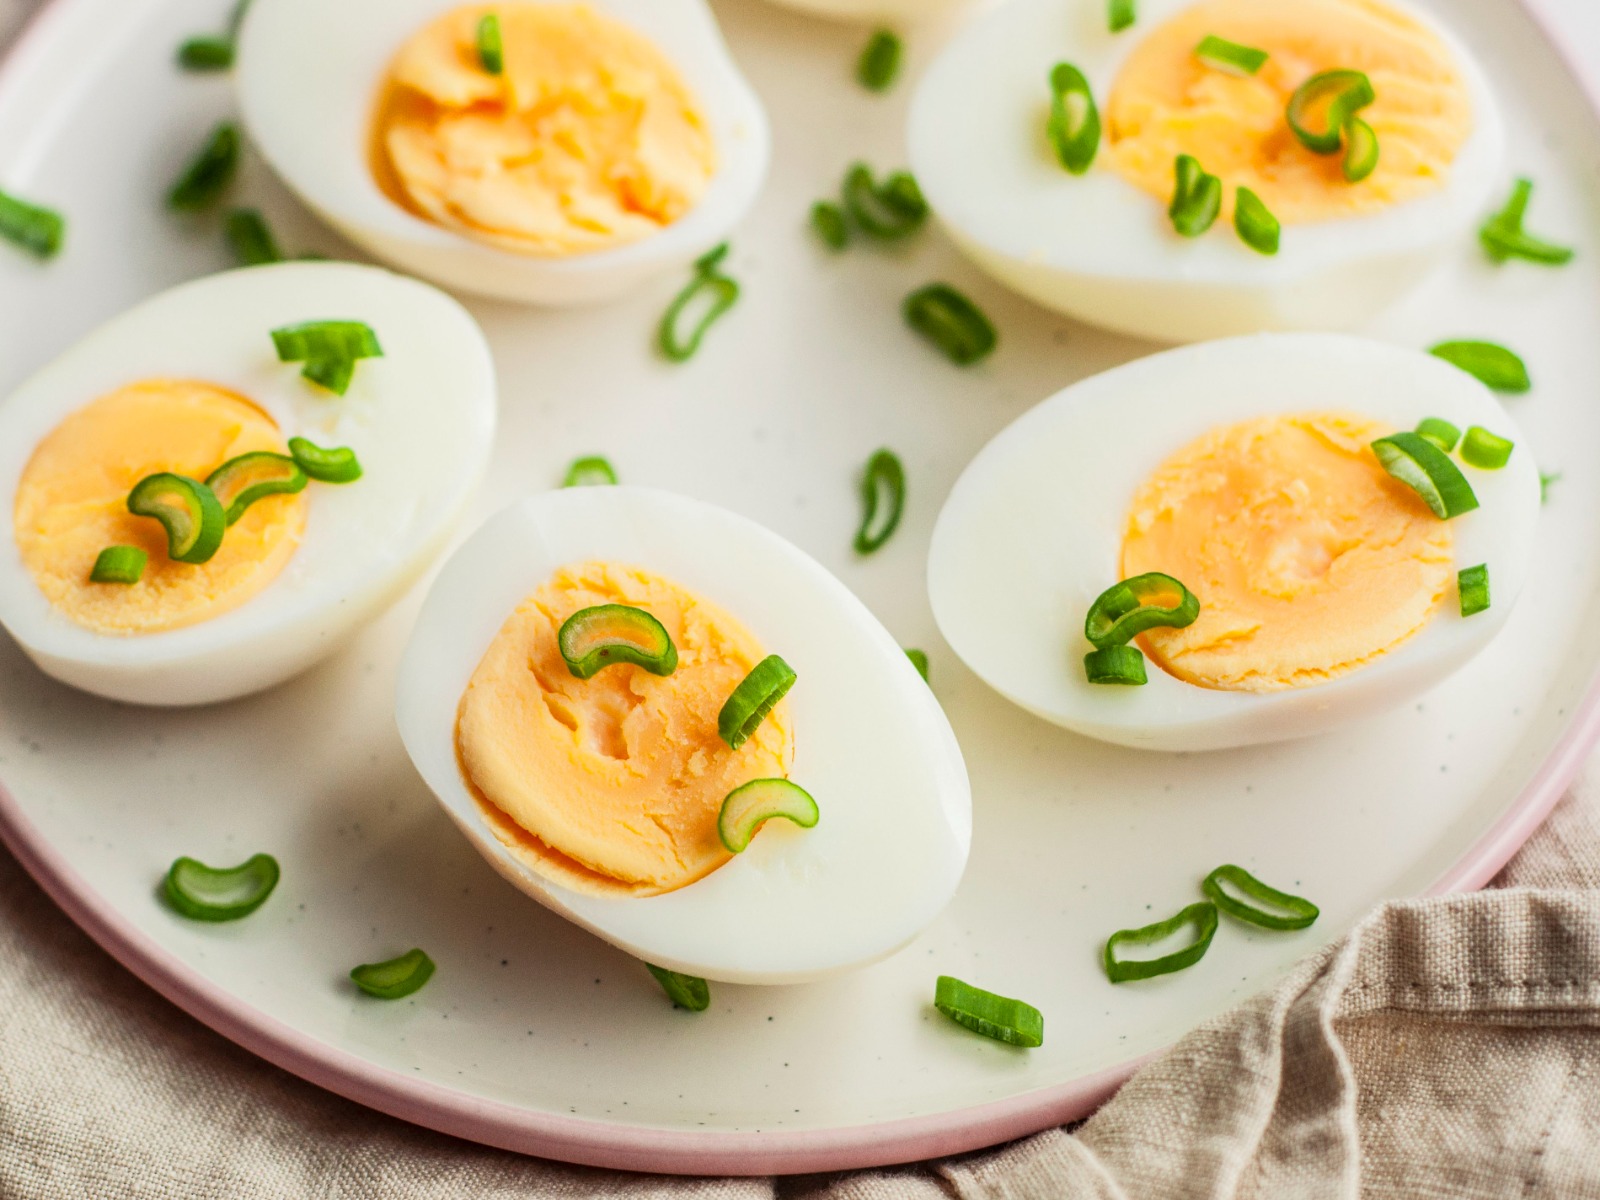 How eating eggs can boost heart health